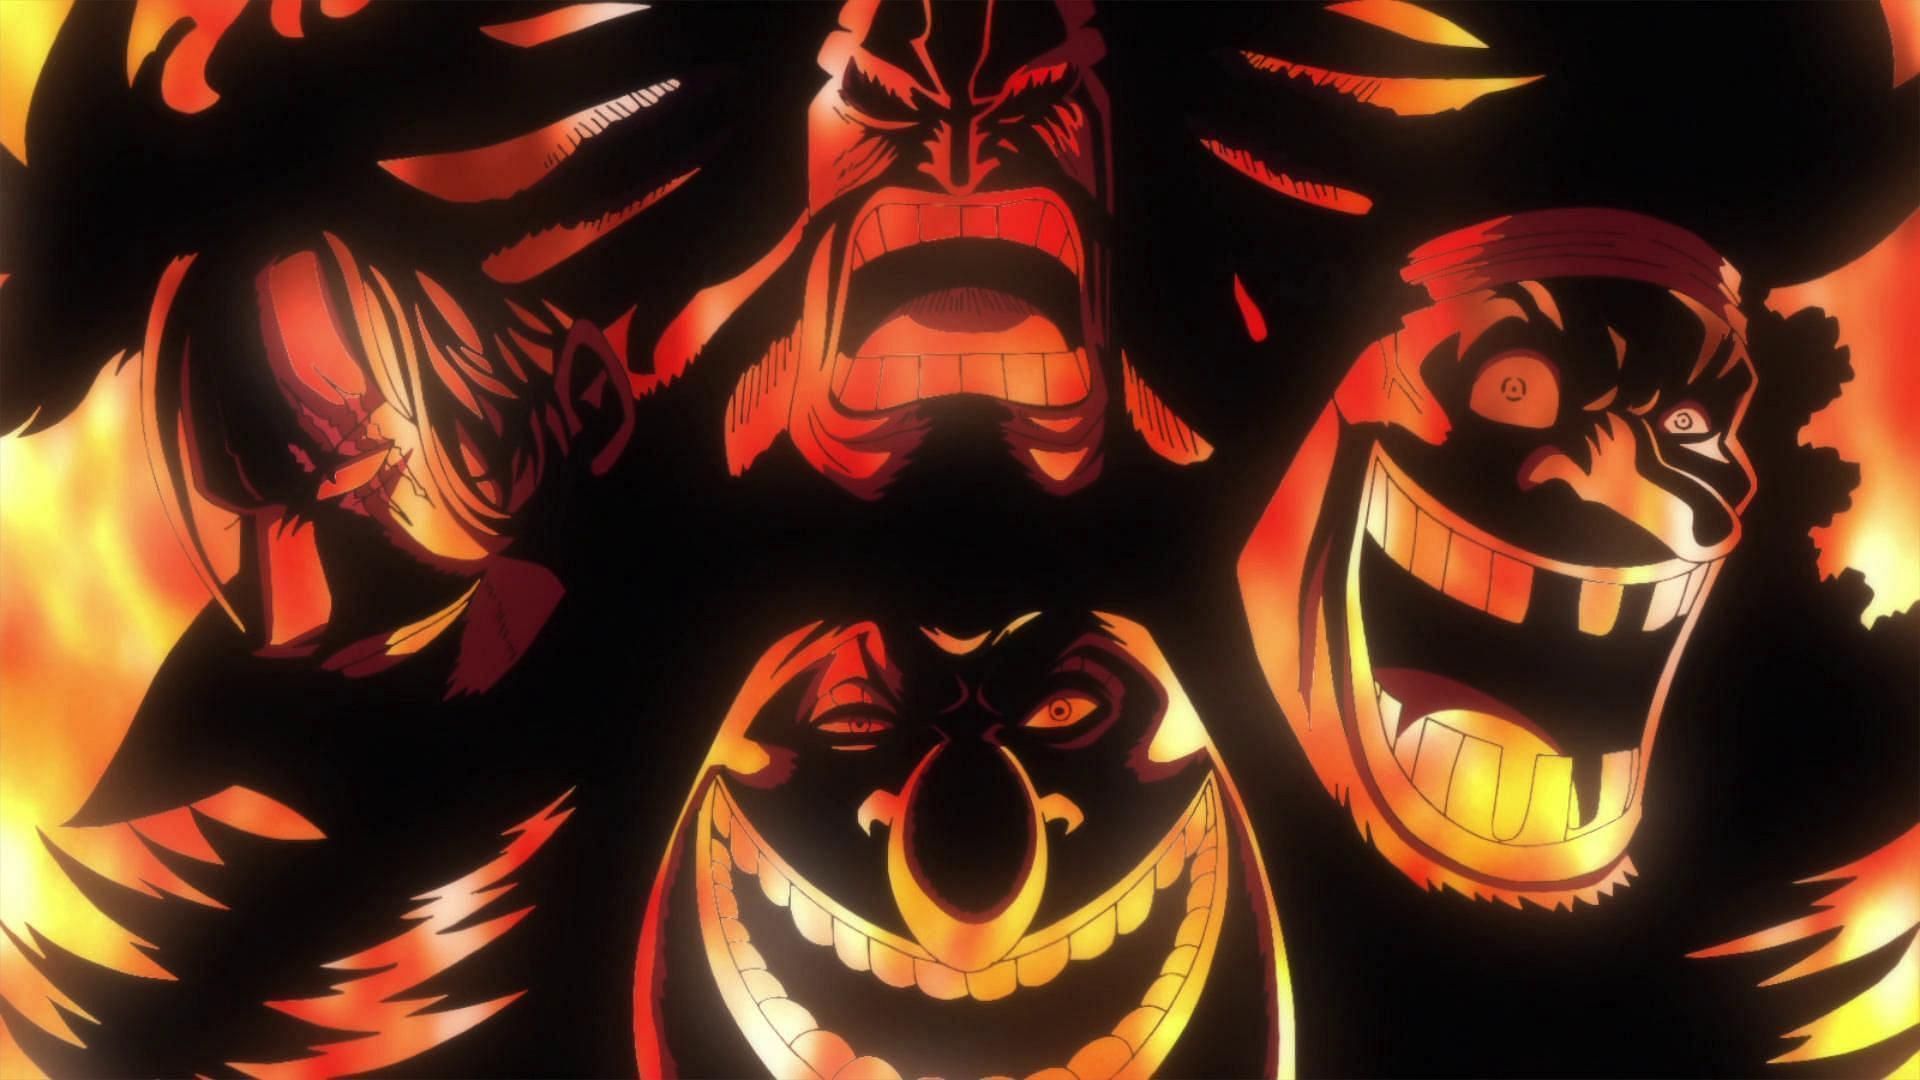 One generation of the Yonko as seen in the series